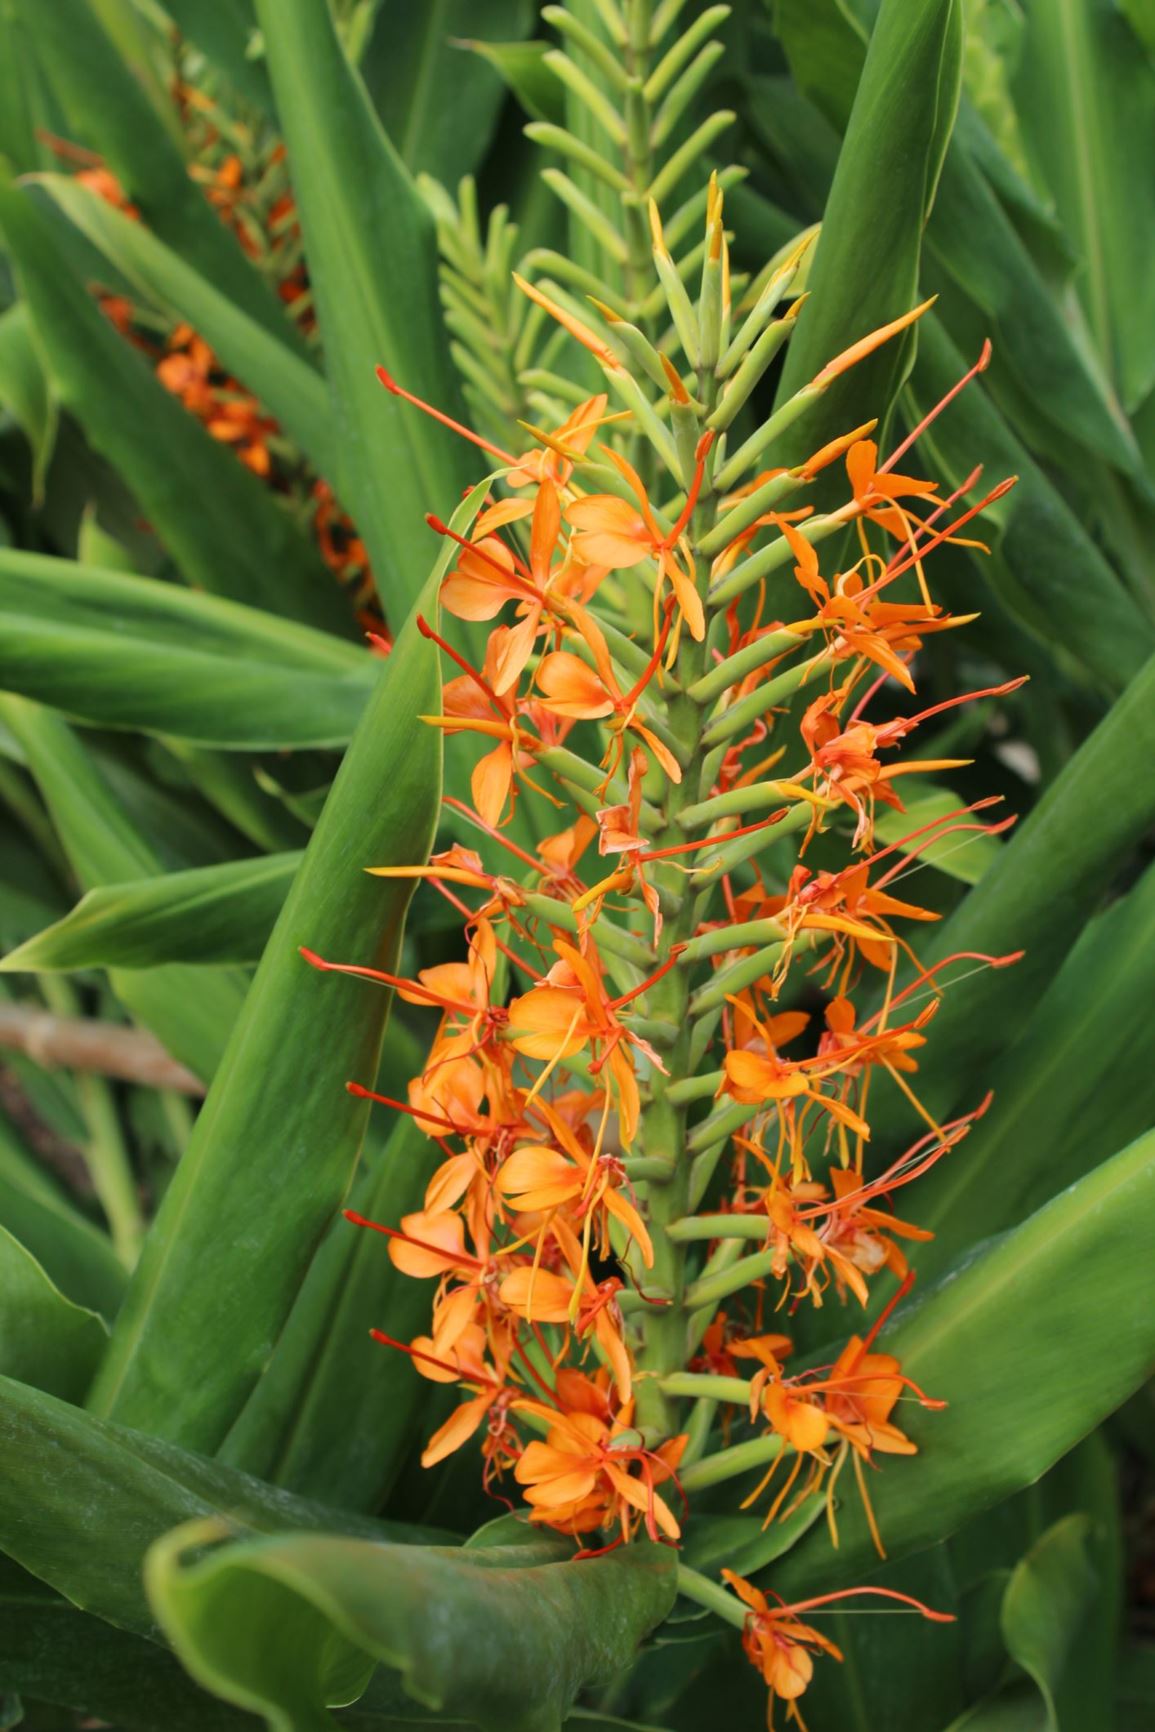 Hedychium coccineum - Red ginger lily, Scarlet ginger lily, 红姜花 hong jiang hua